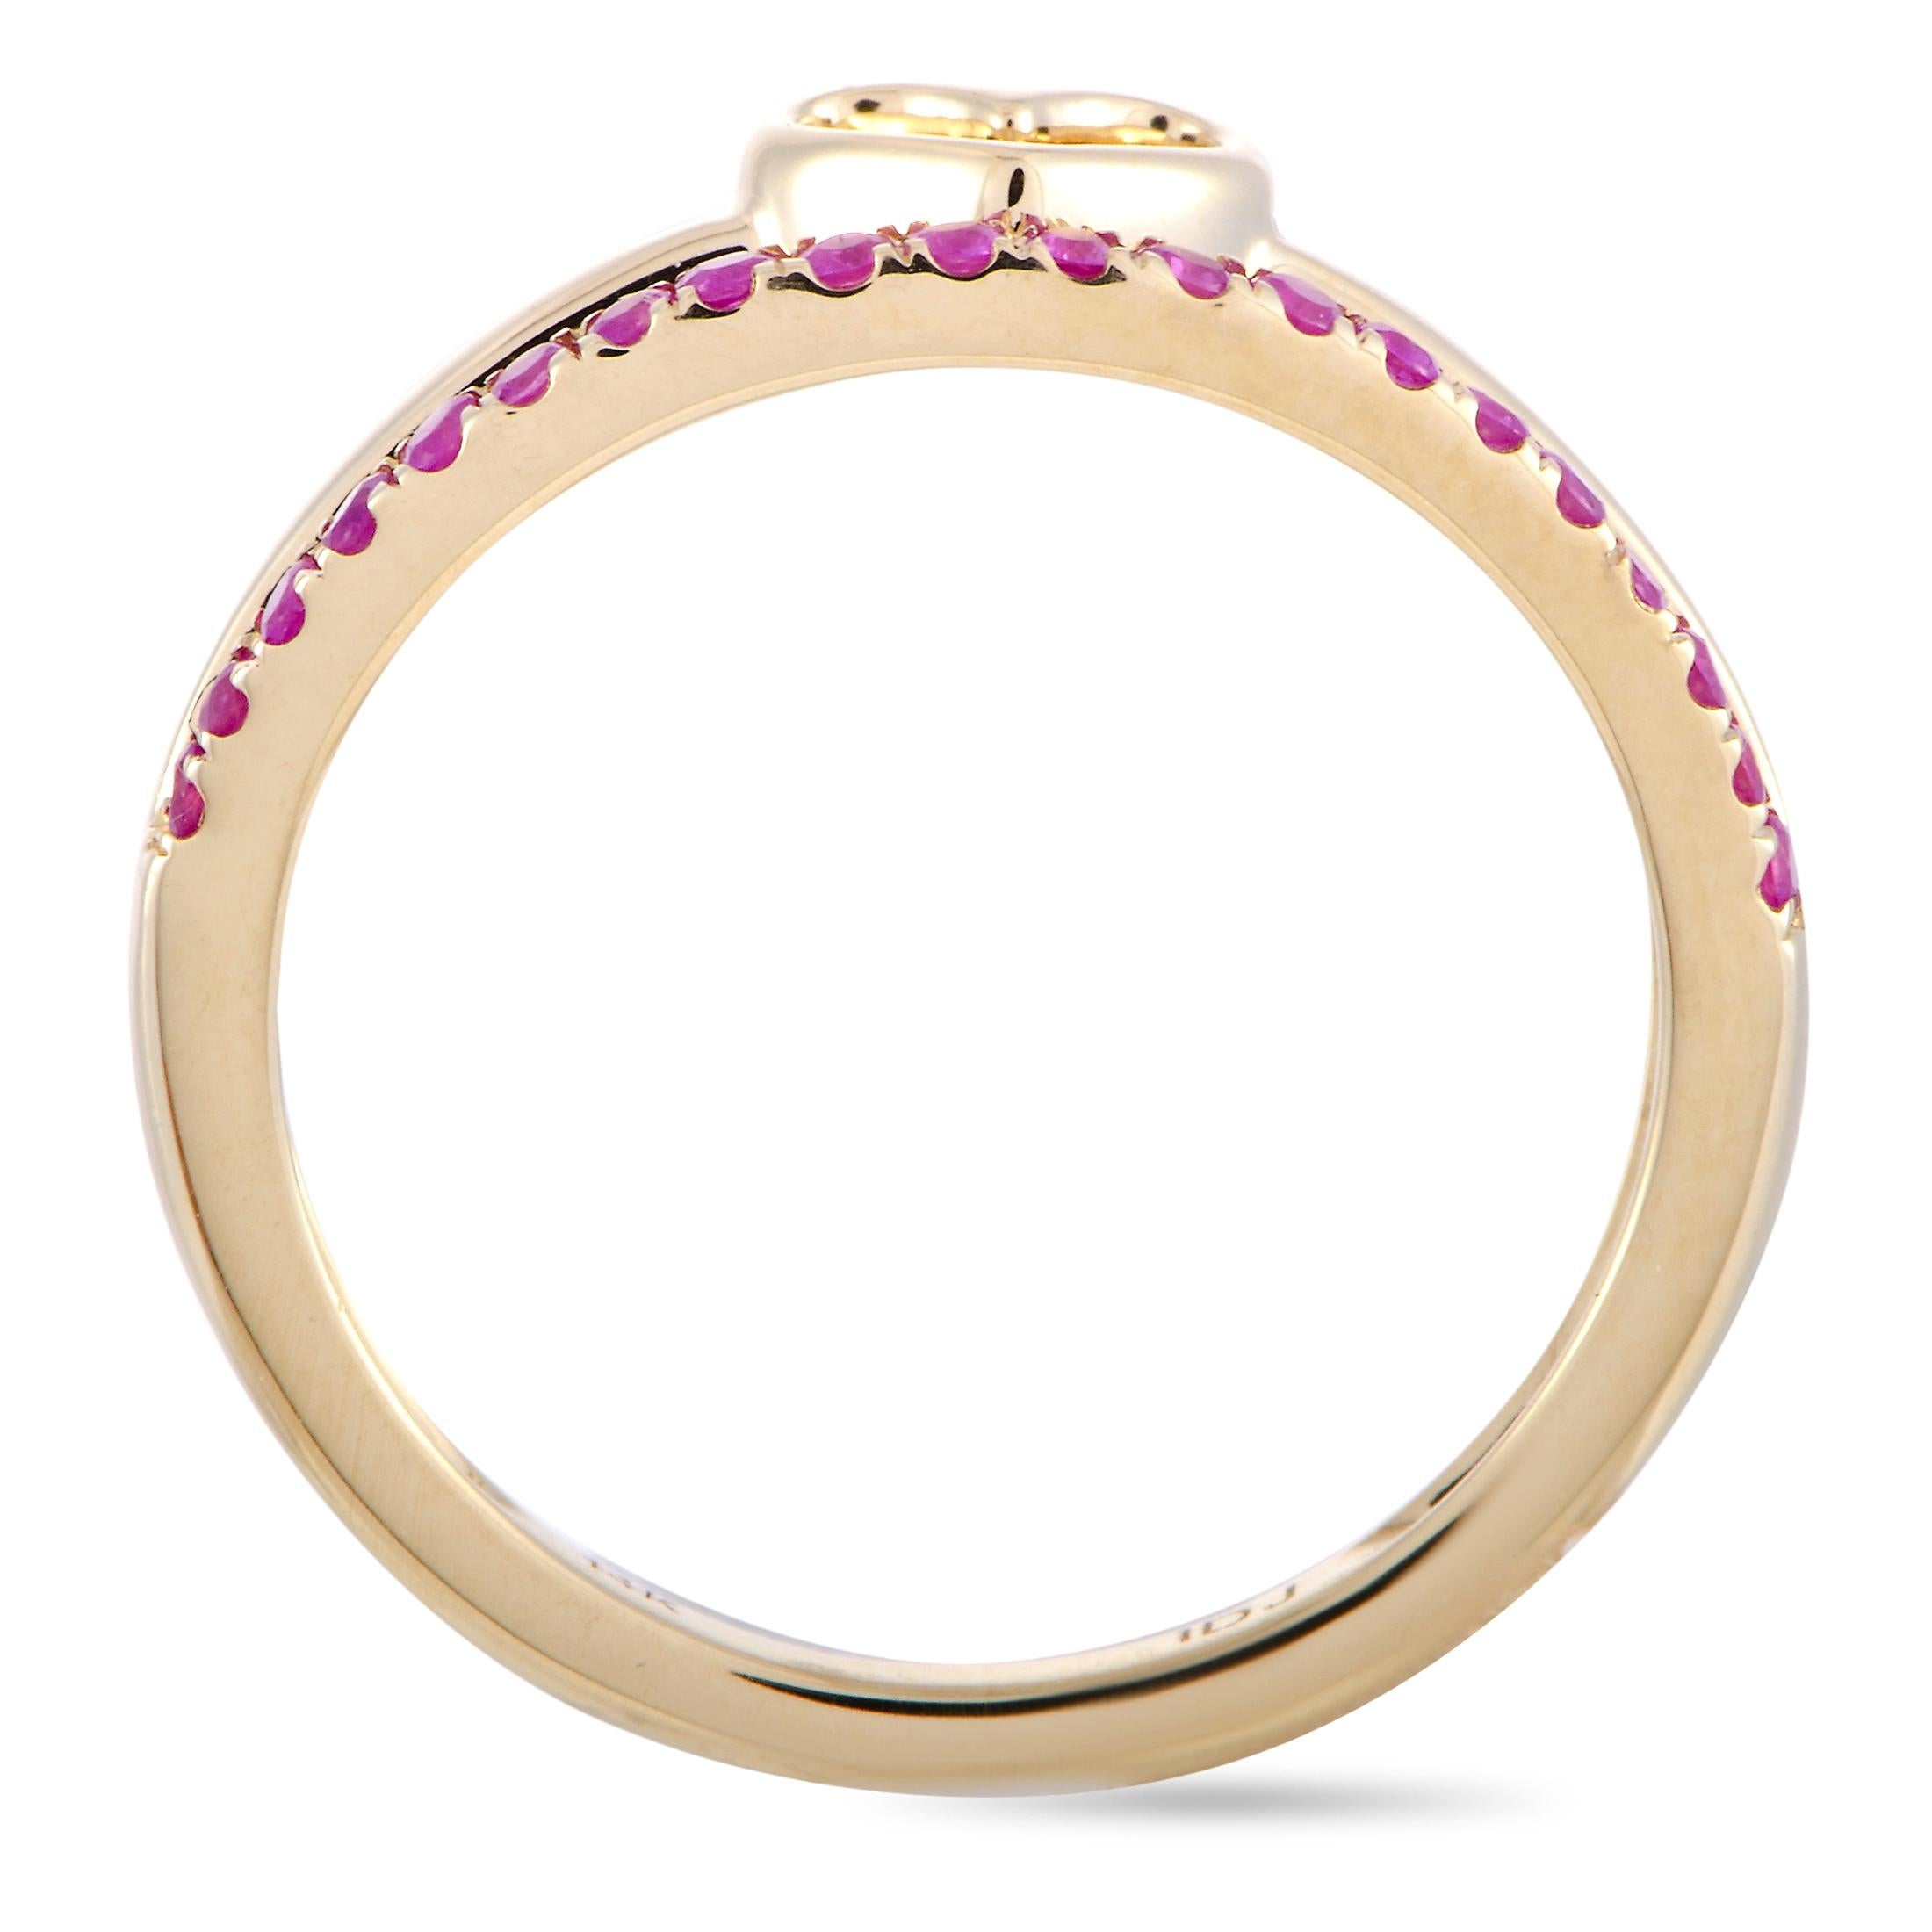 This LB Exclusive ring is crafted from 14K yellow gold and set with rubies that amount to 0.25 carats. The ring weighs 2.6 grams, boasting band thickness of 2 mm and top height of 4 mm, while top dimensions measure 7 by 20 mm.

Offered in brand new